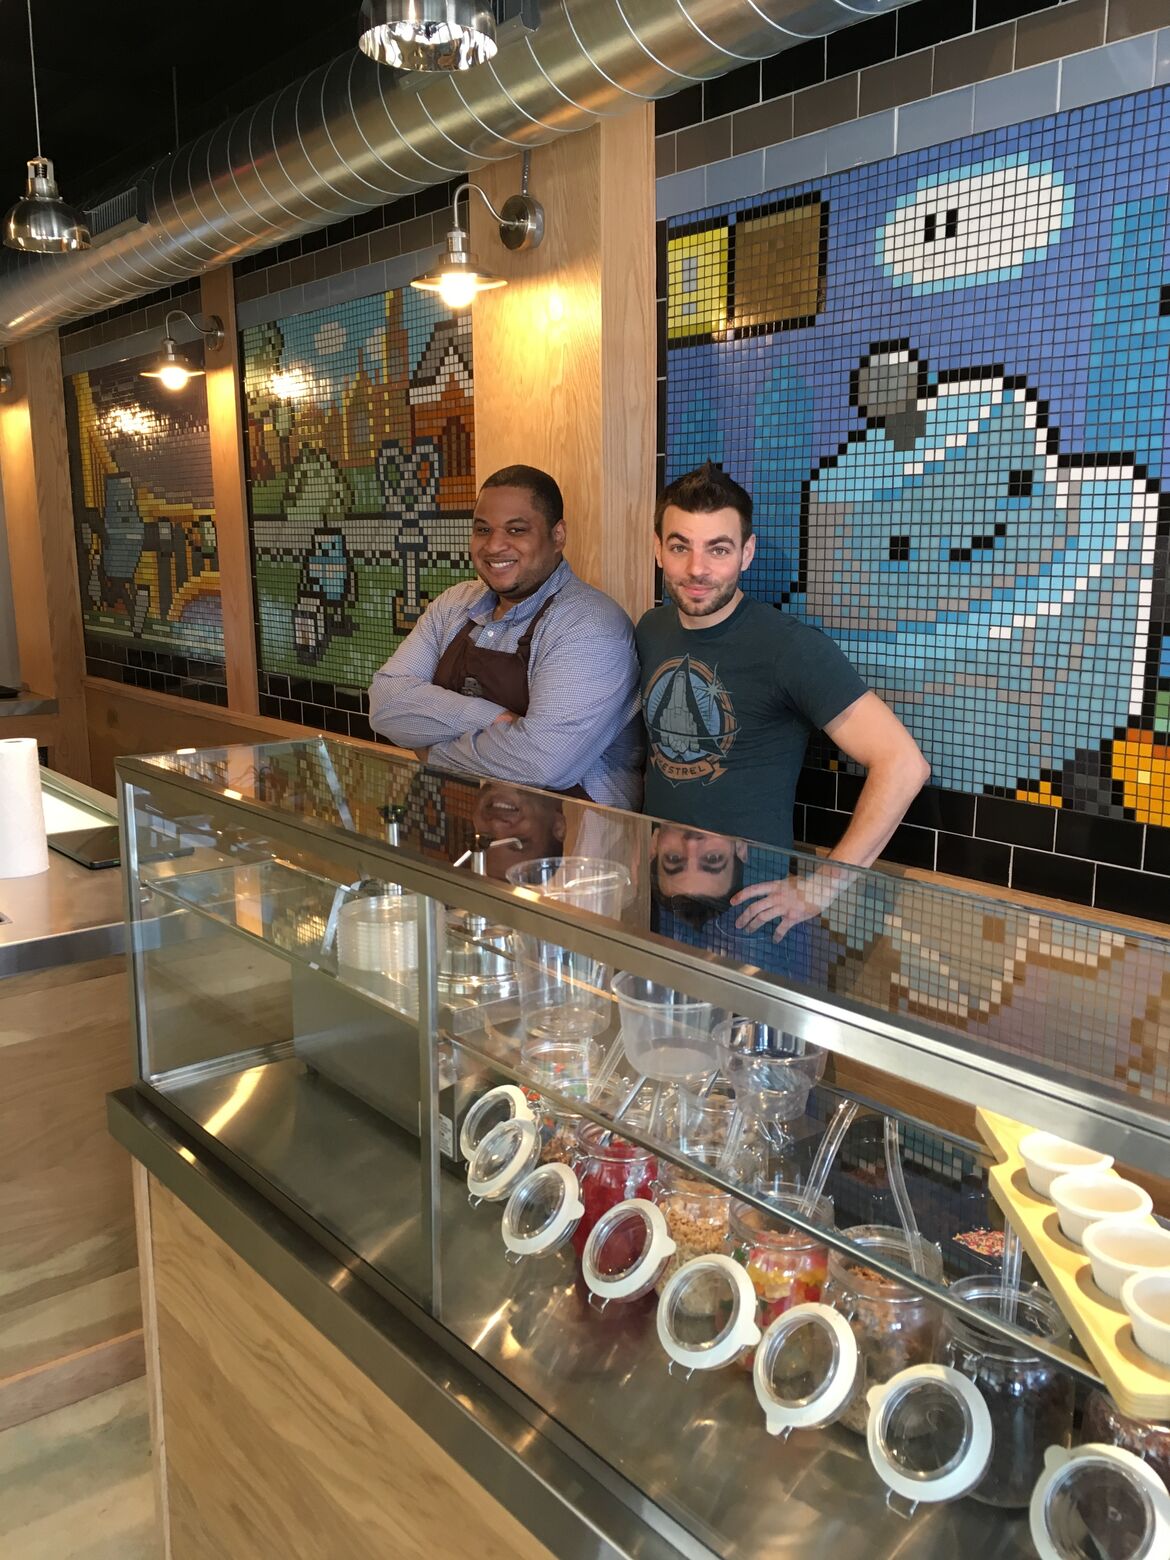 ONE-ON-ONE: Chris and Steve from Tubby Robot Ice Cream Factory